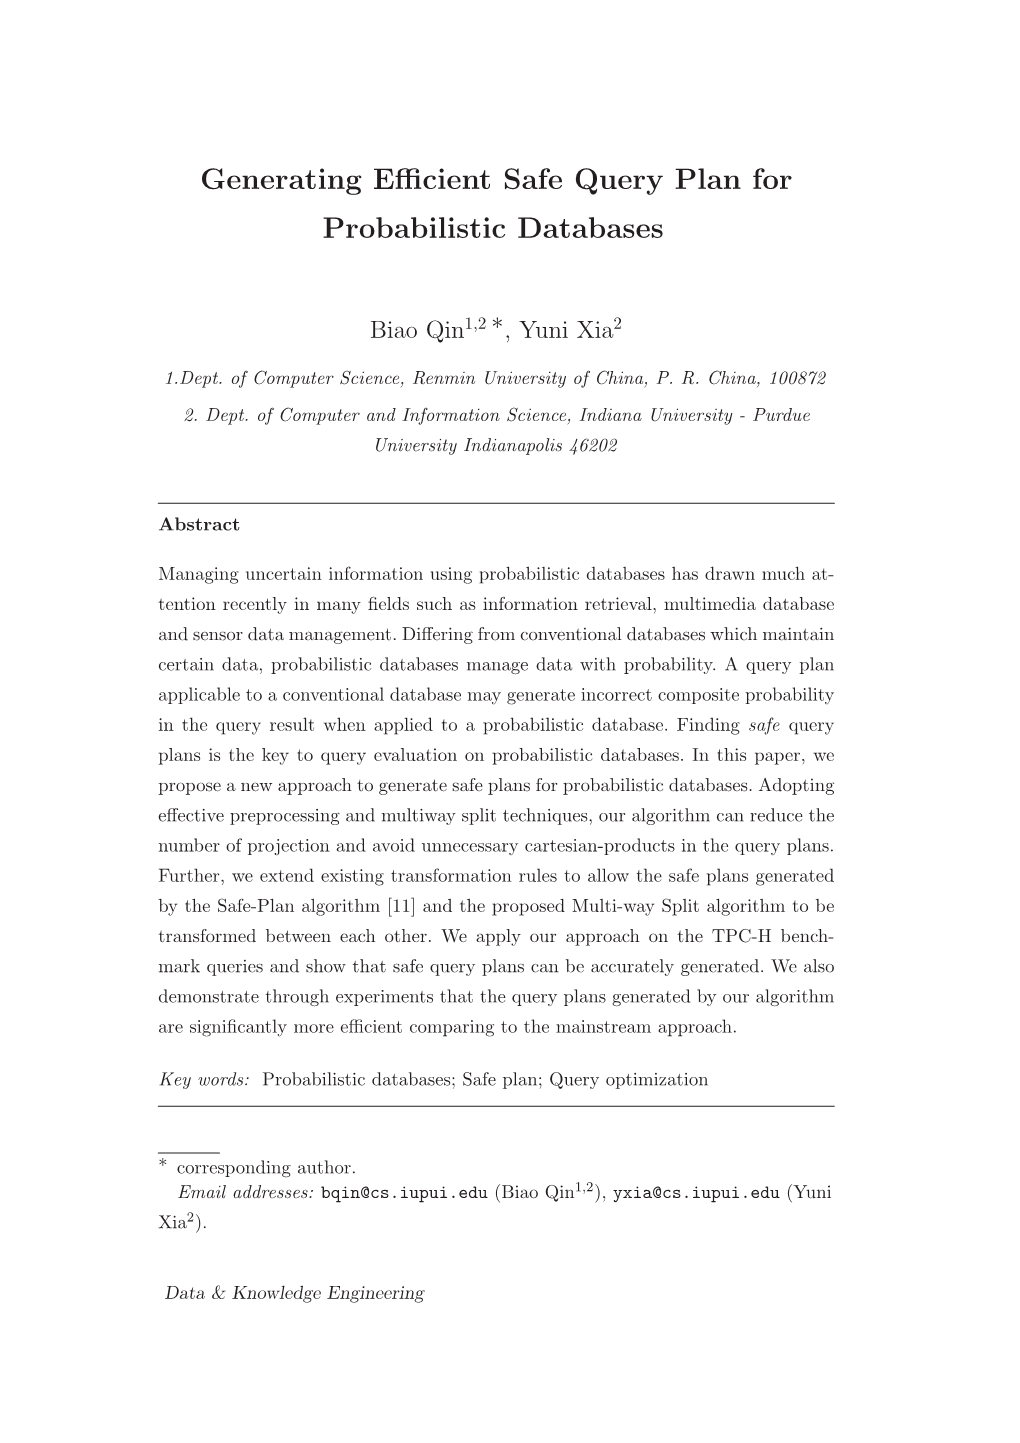 Generating Efficient Safe Query Plan for Probabilistic Databases